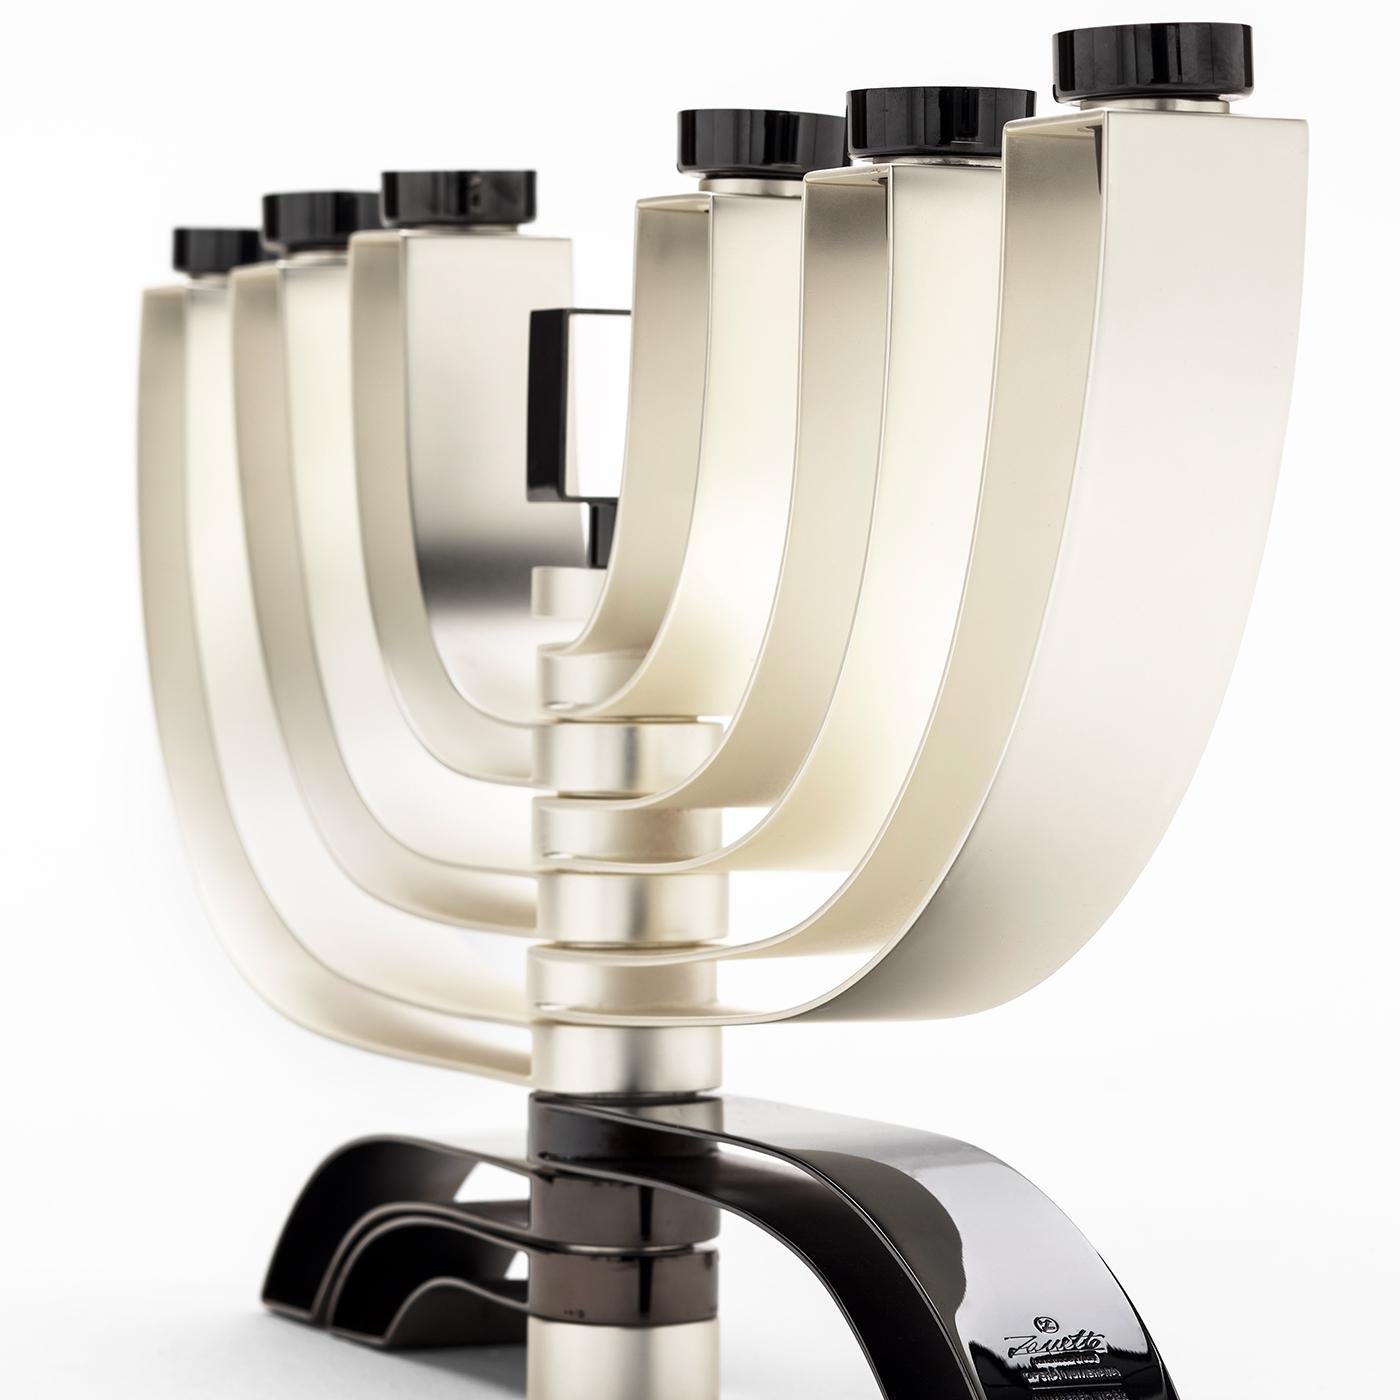 This superb table candelabra features a modern structure alternating titanium with satin silver. Boasting a sinuous and elaborate silhouette, the six shiny titanium candle holders are mounted on six pairs of silver arms, sustained on a titanium base